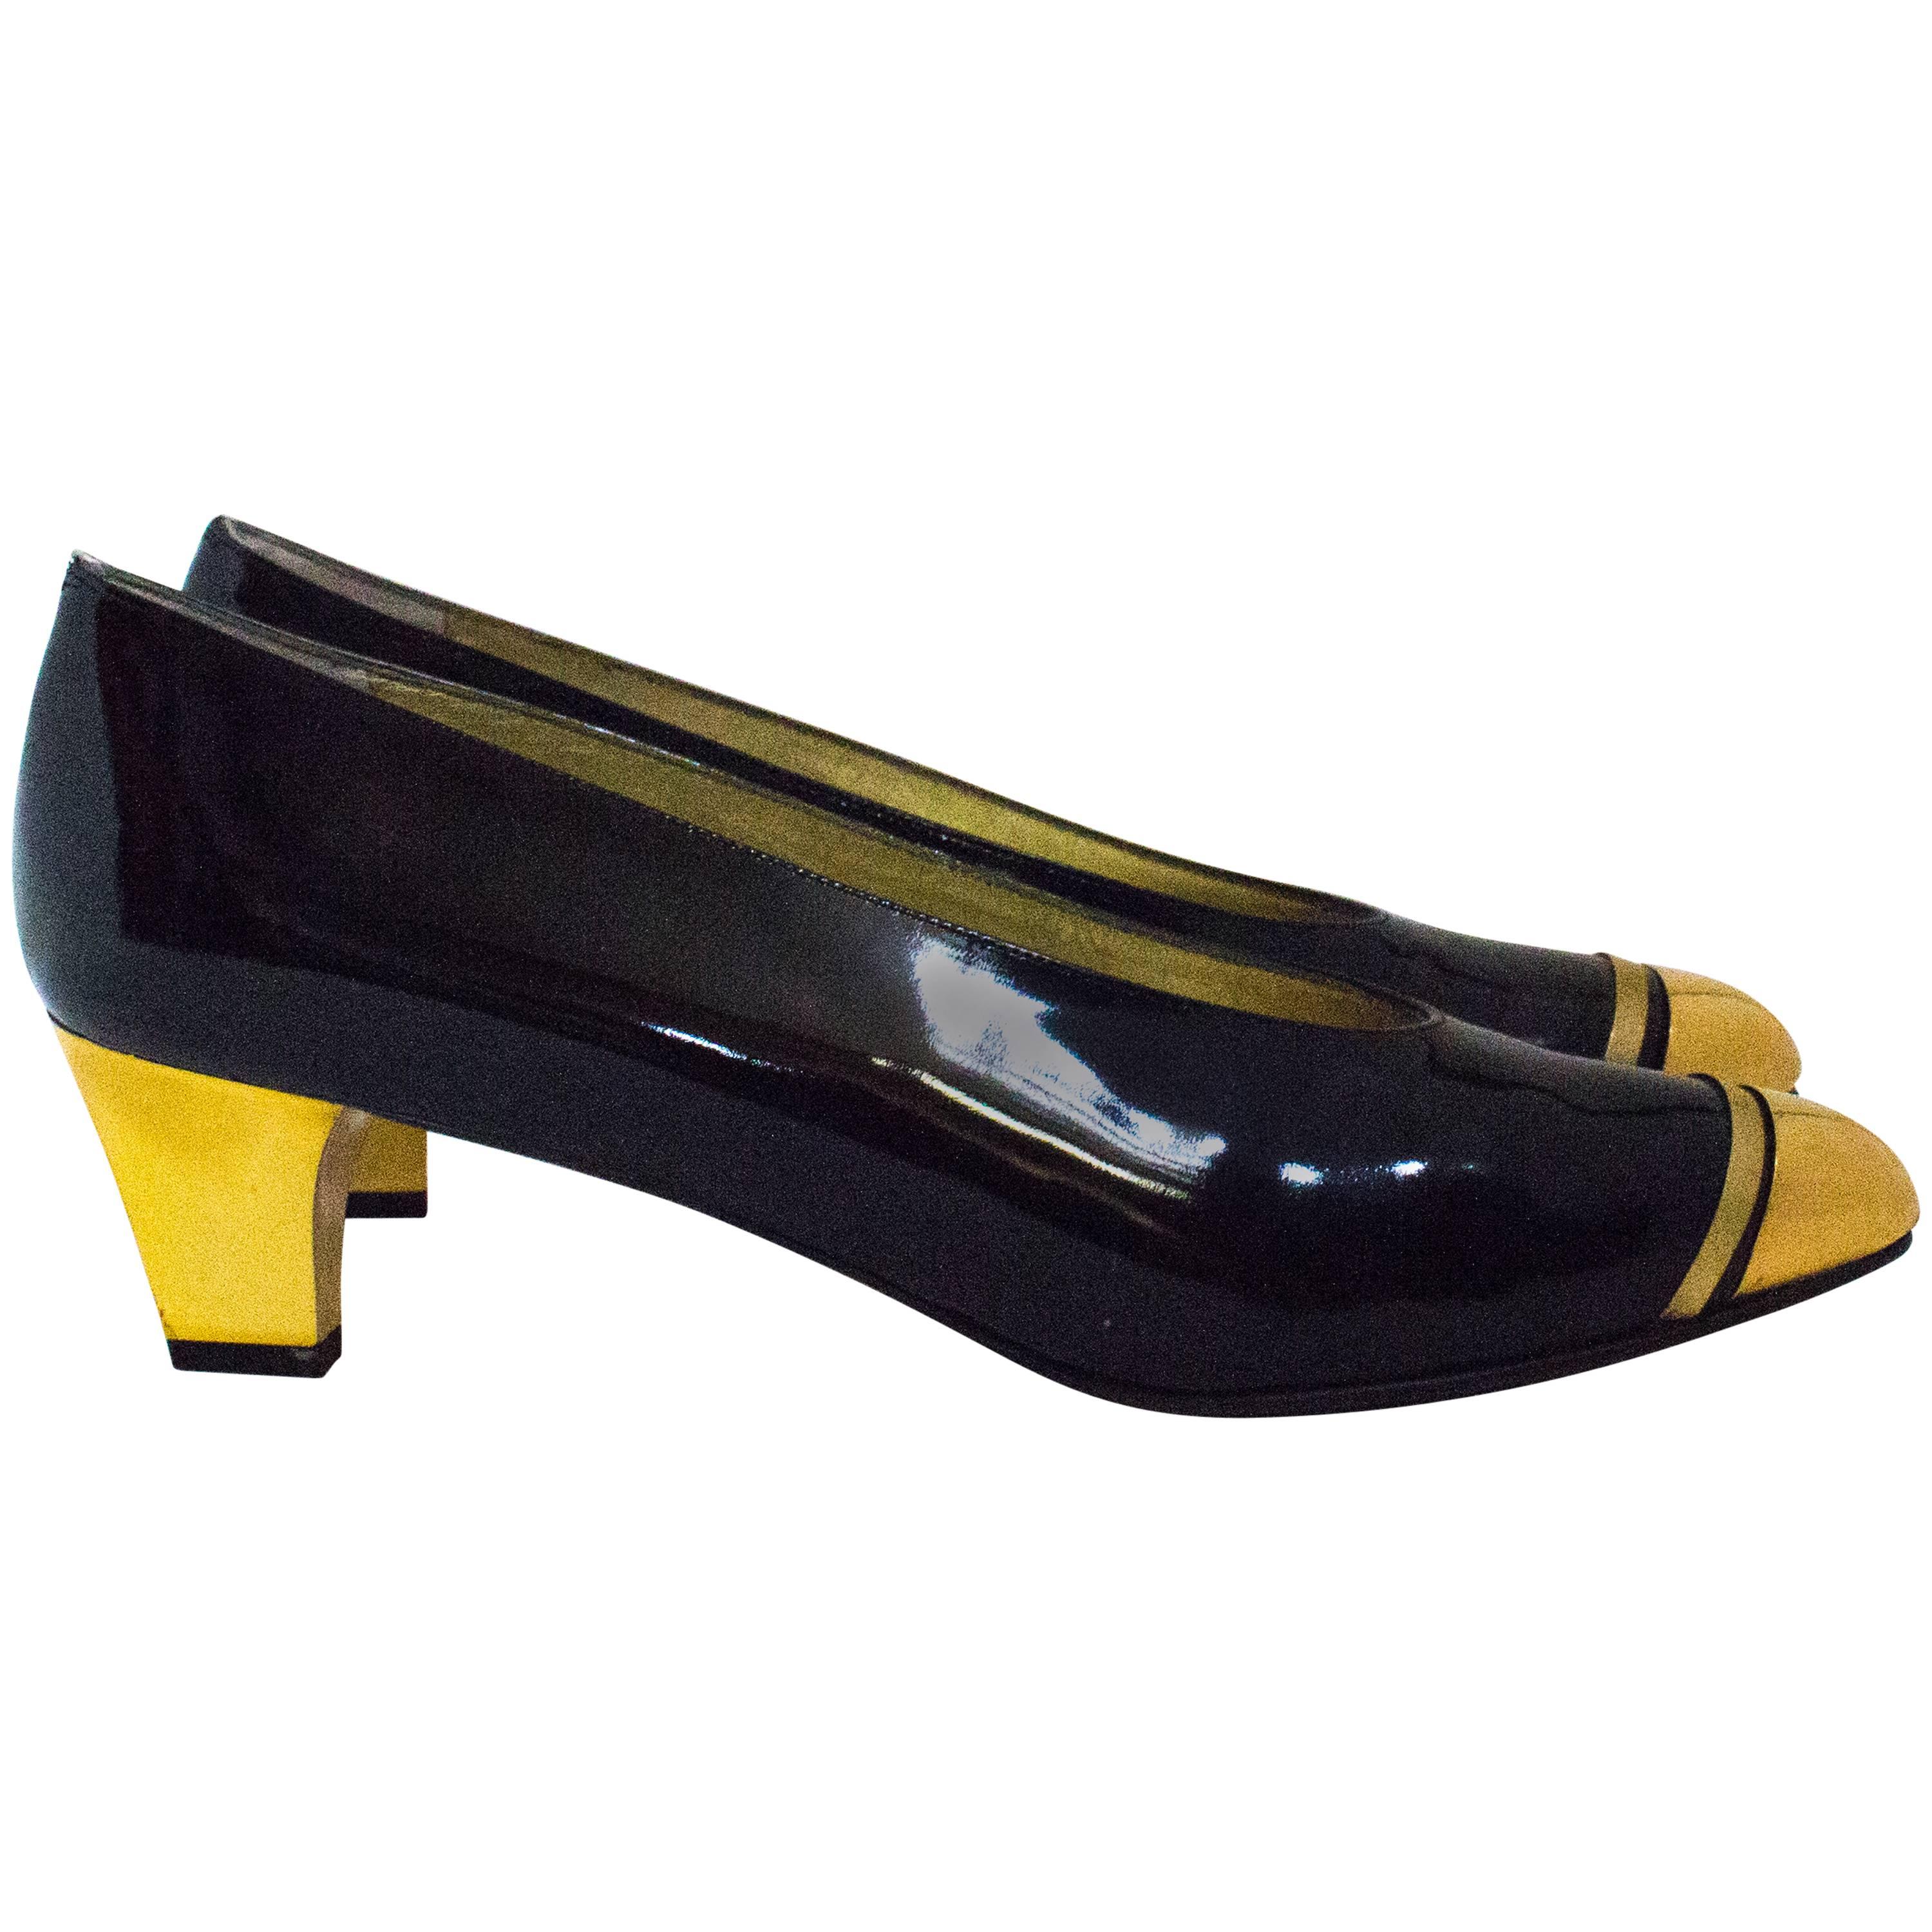 80s Black Patent Leather Heels with Gold Toe Caps ad Heels For Sale